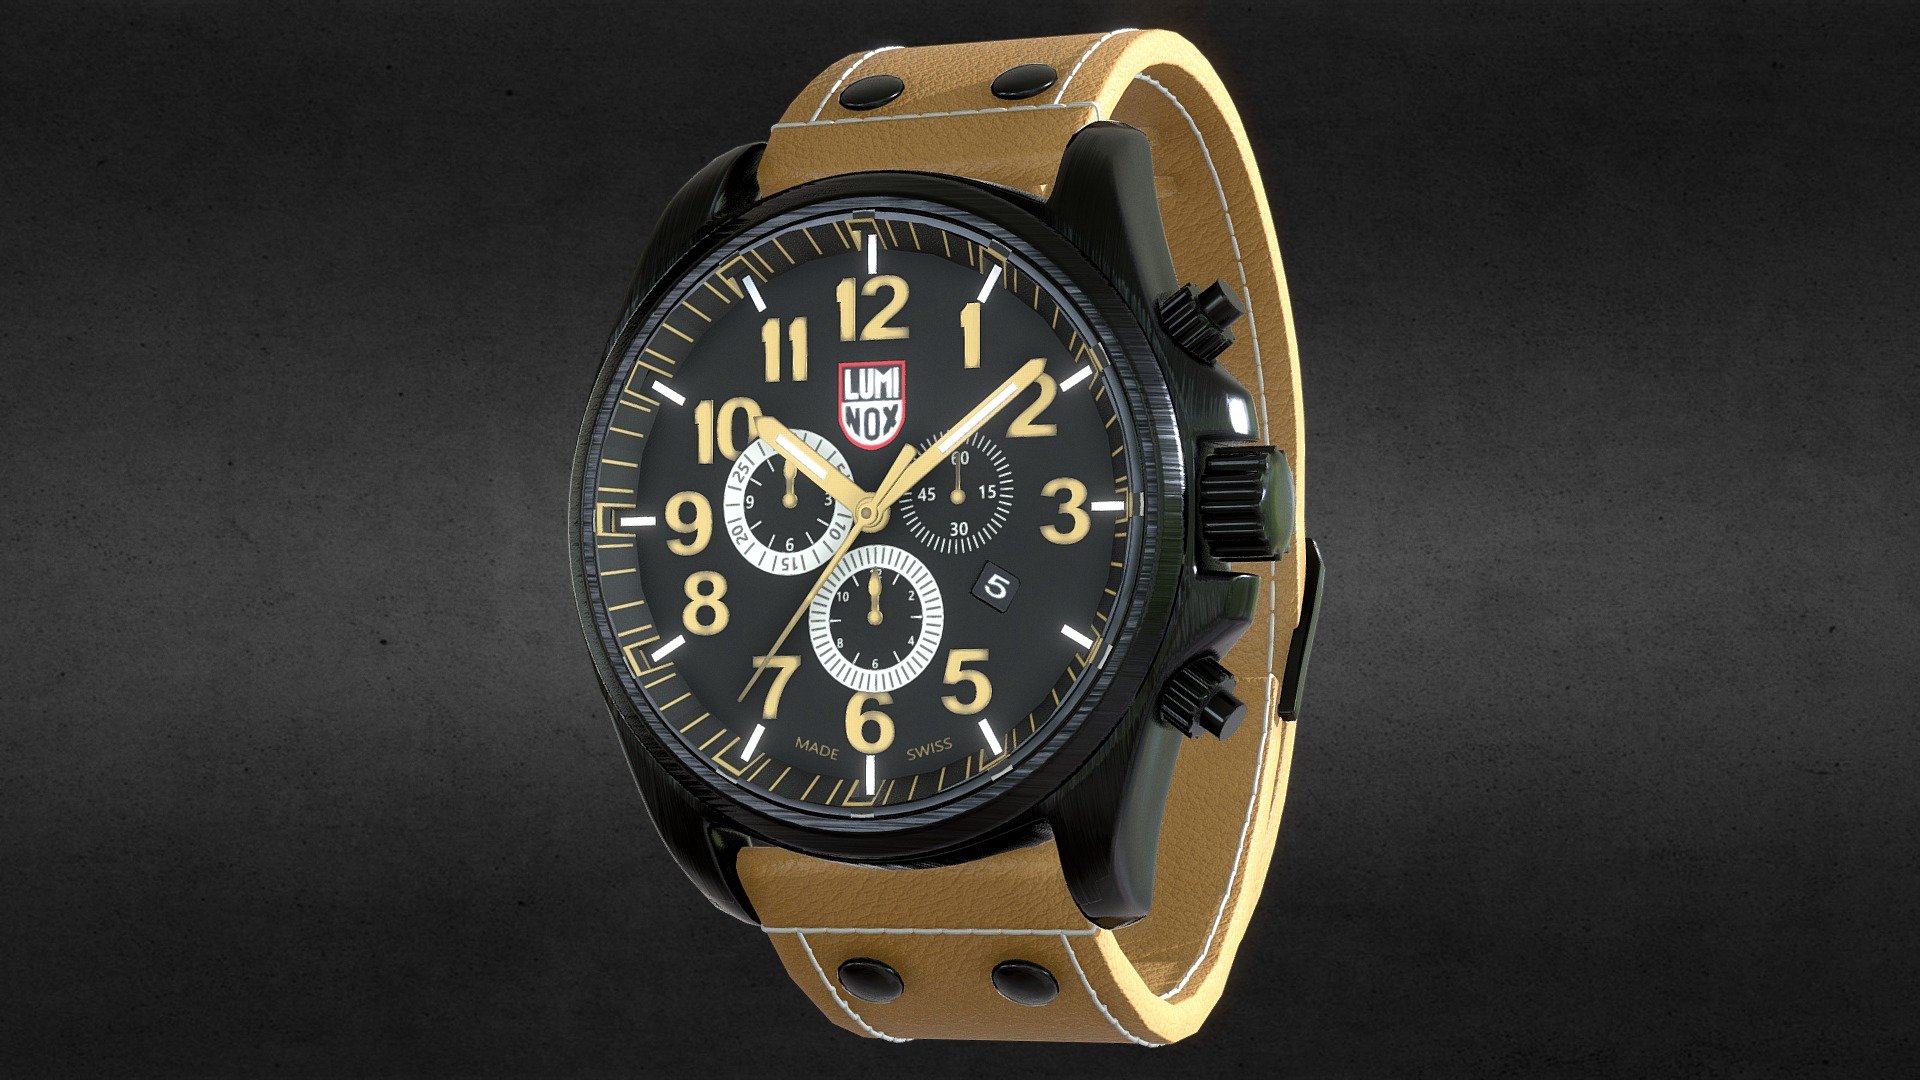 Awesome stainless steel Luminox Military watch with leather strap.
Use for Unreal Engine 4 and Unity3D. Try in augmented reality in the AR-Watches app. 
Links to the app: Android, iOS

Currently available for download in dae format.

3D model developed by AR-Watches

Disclaimer: We do not own the design of the watch, we only made the 3D model 3d model